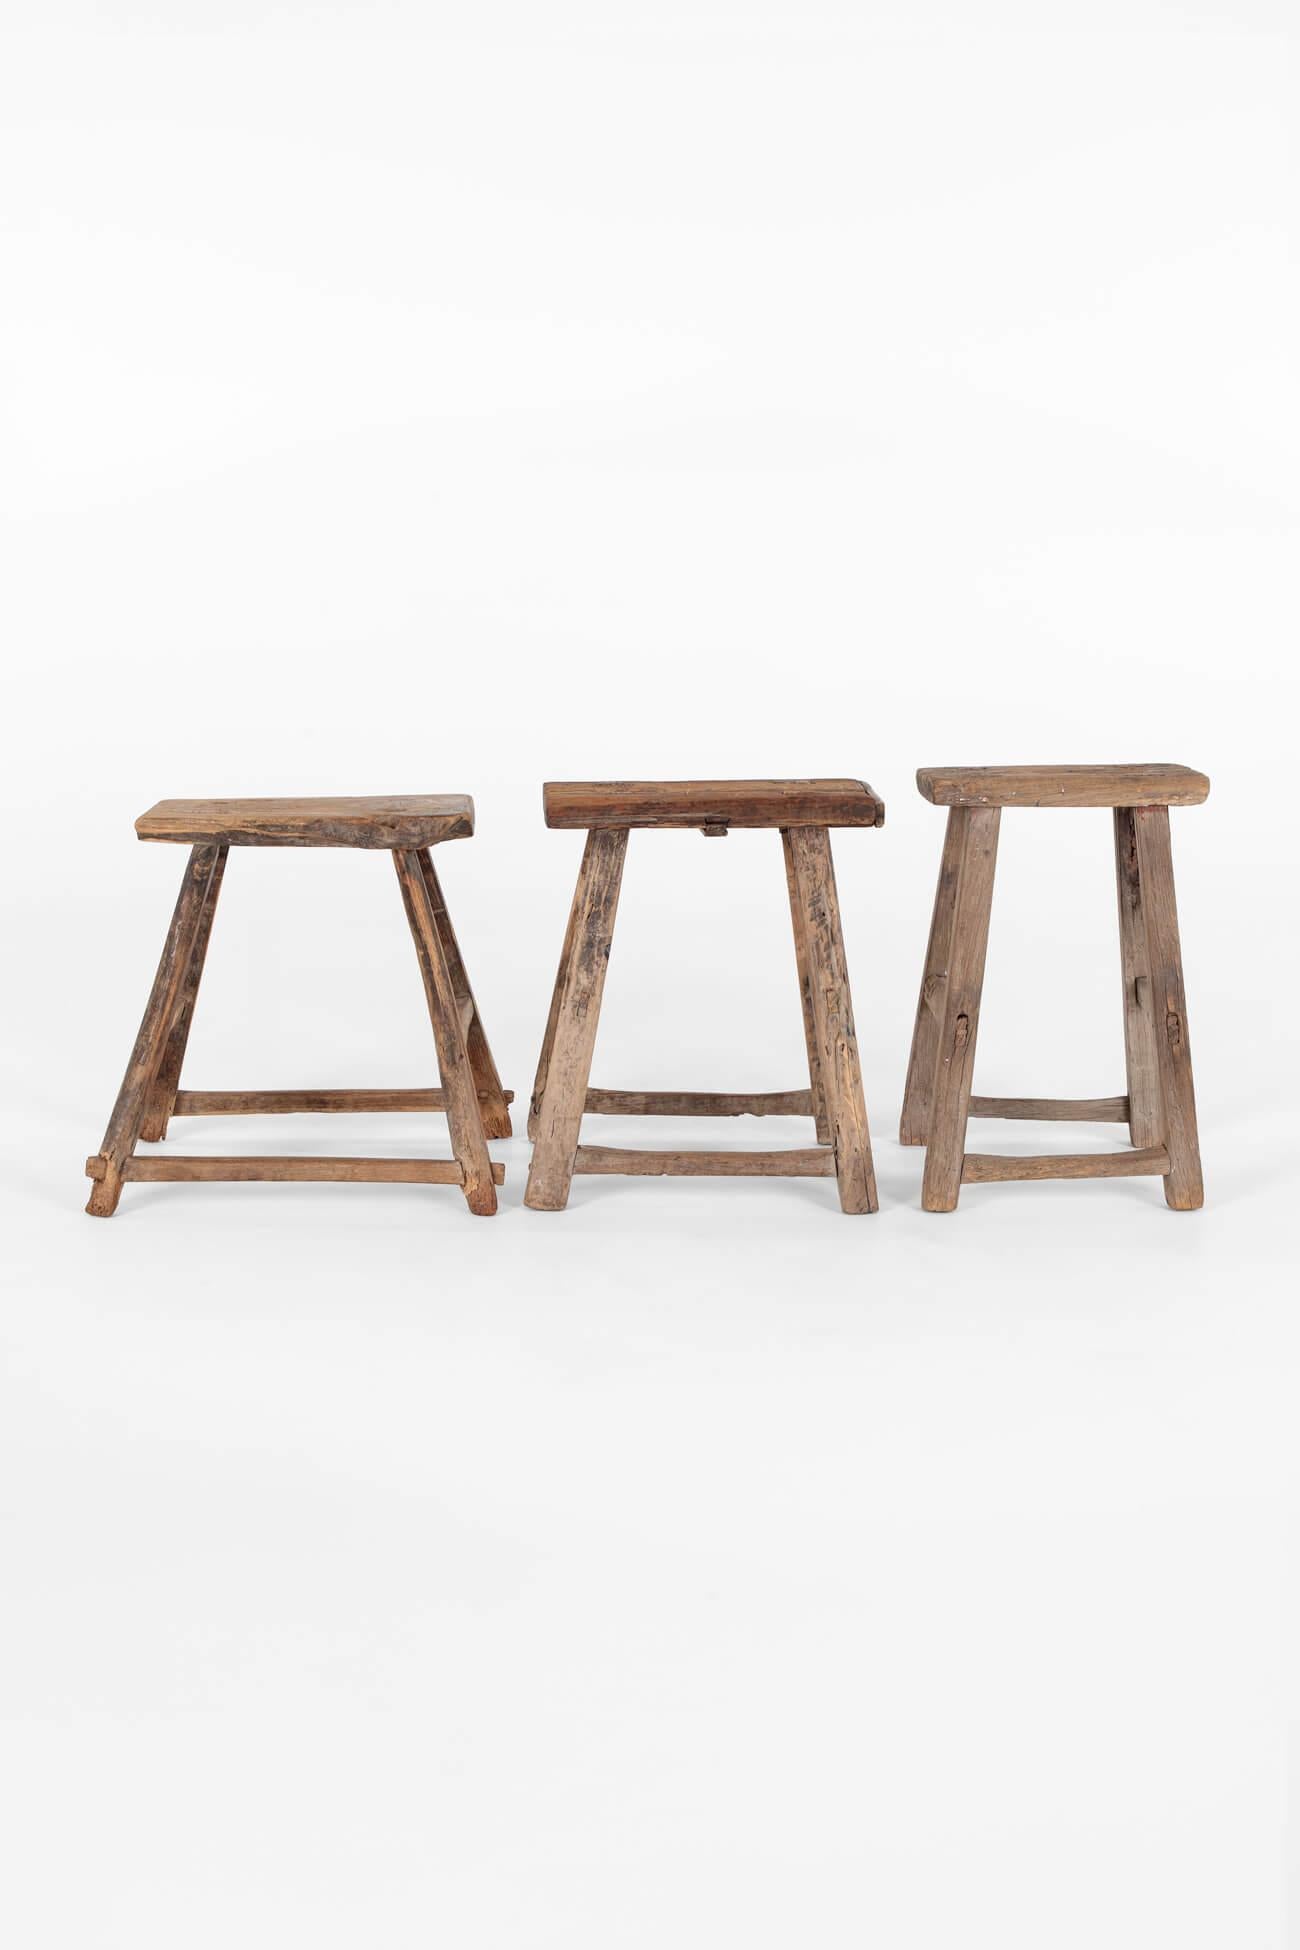 Chinese Trio of Rustic Elm Stools For Sale